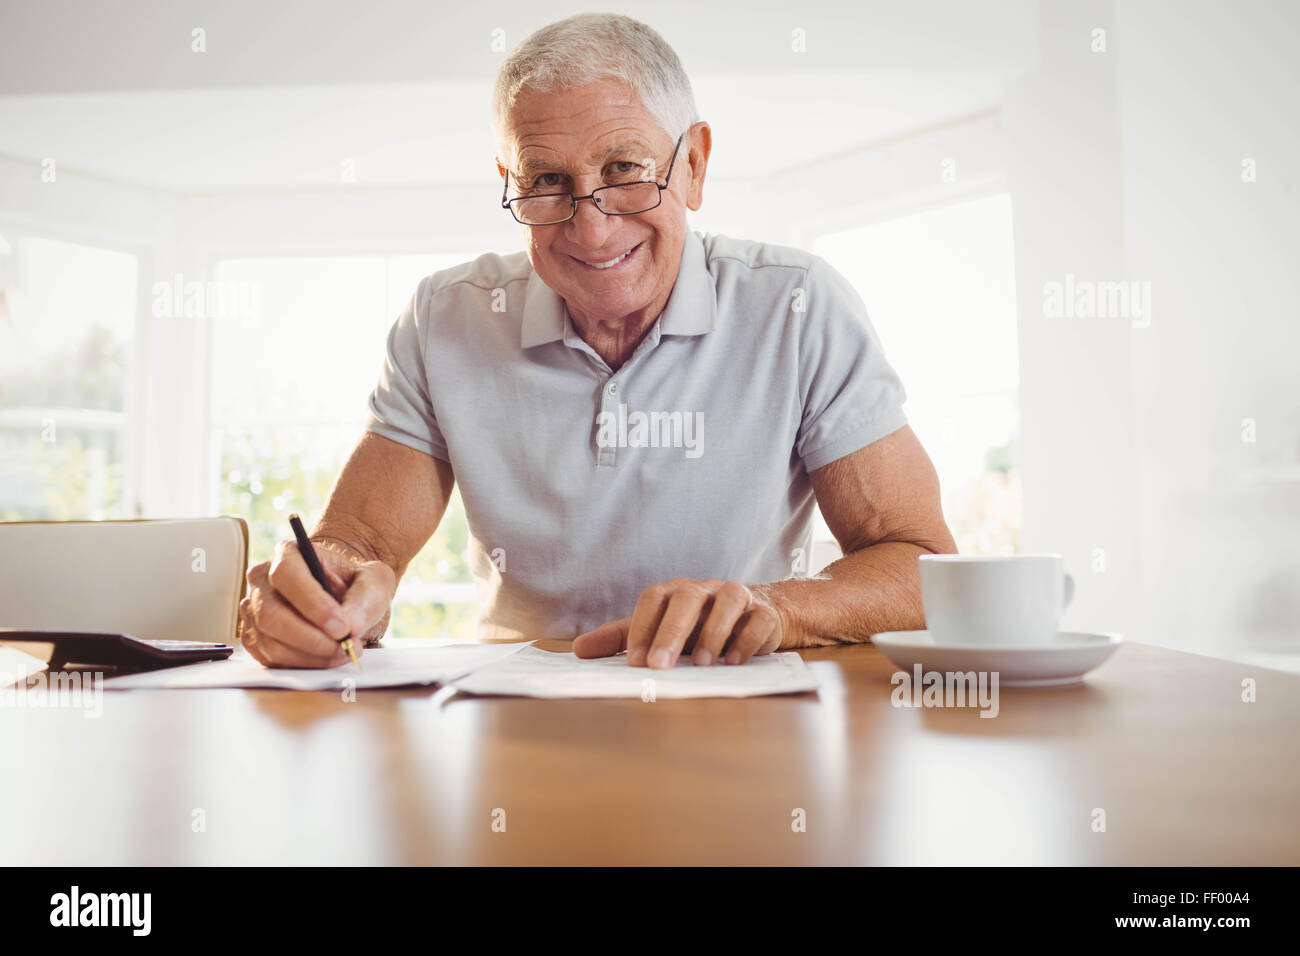 Worried senior man with tax documents Stock Photo